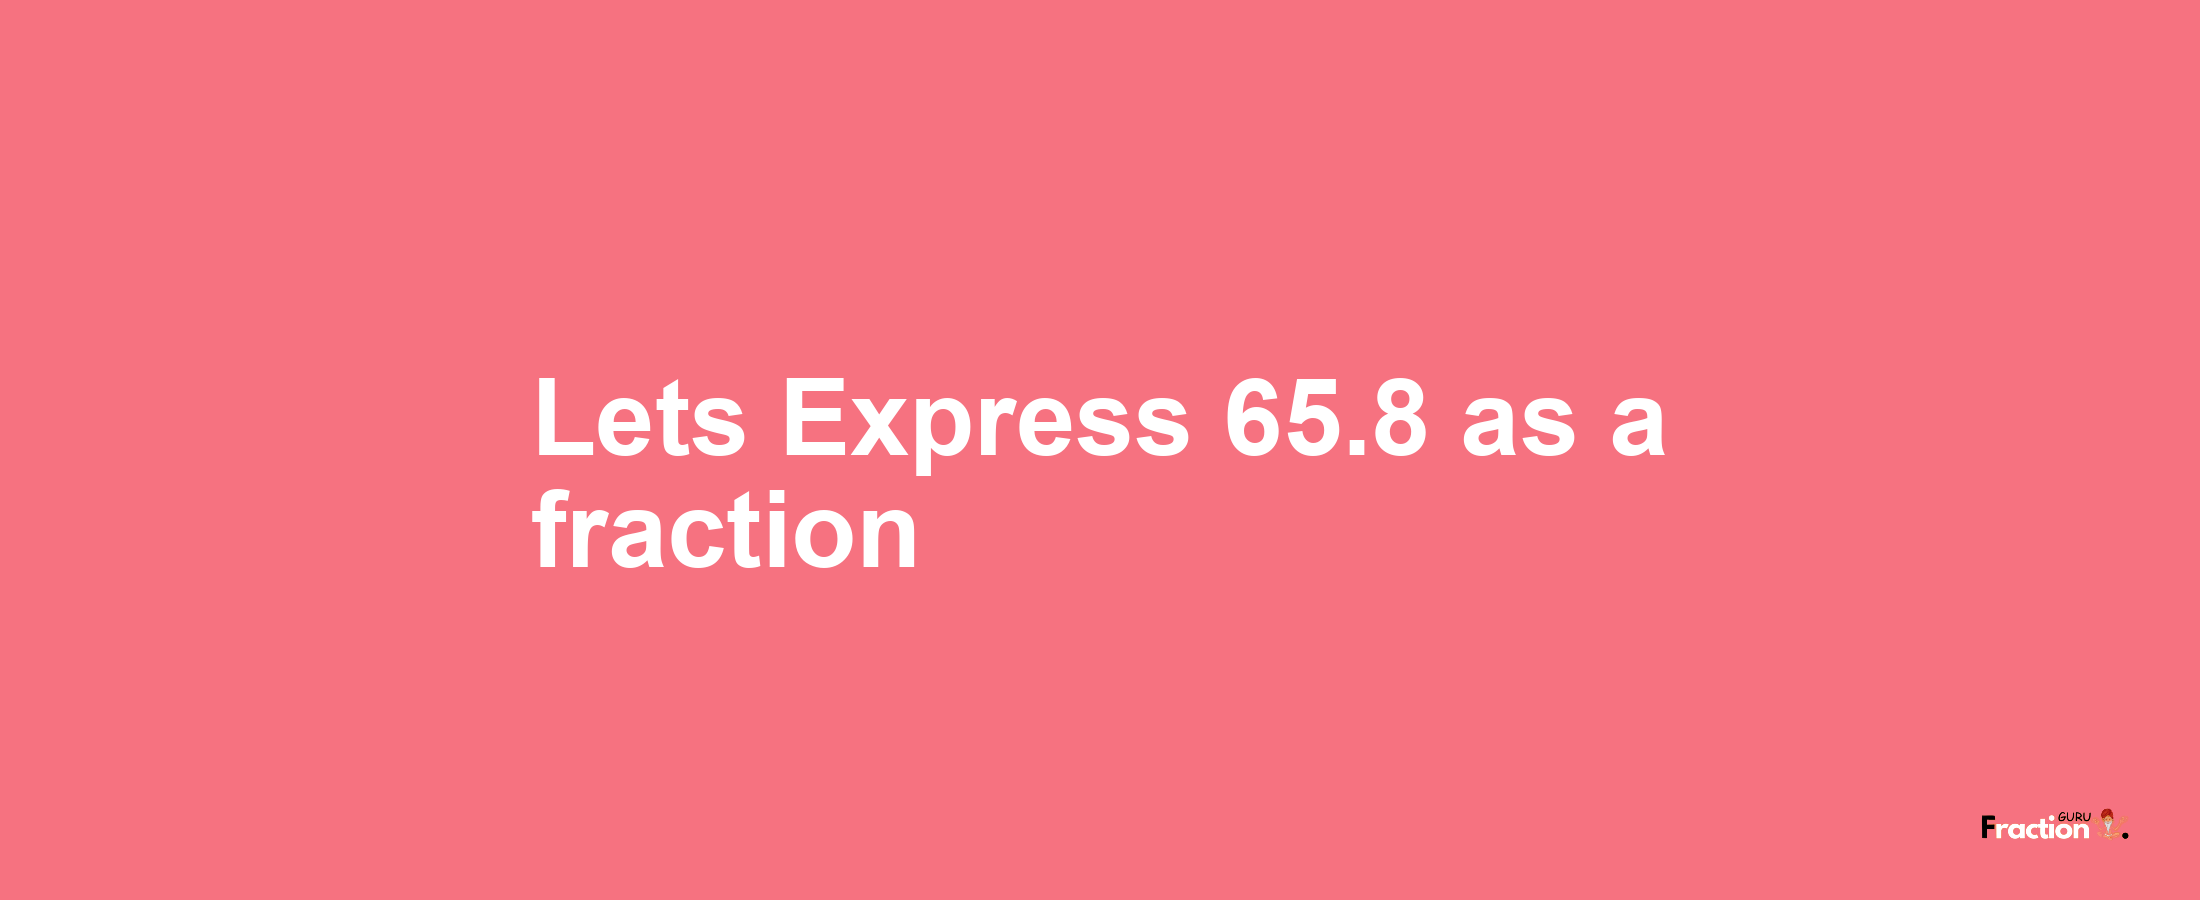 Lets Express 65.8 as afraction